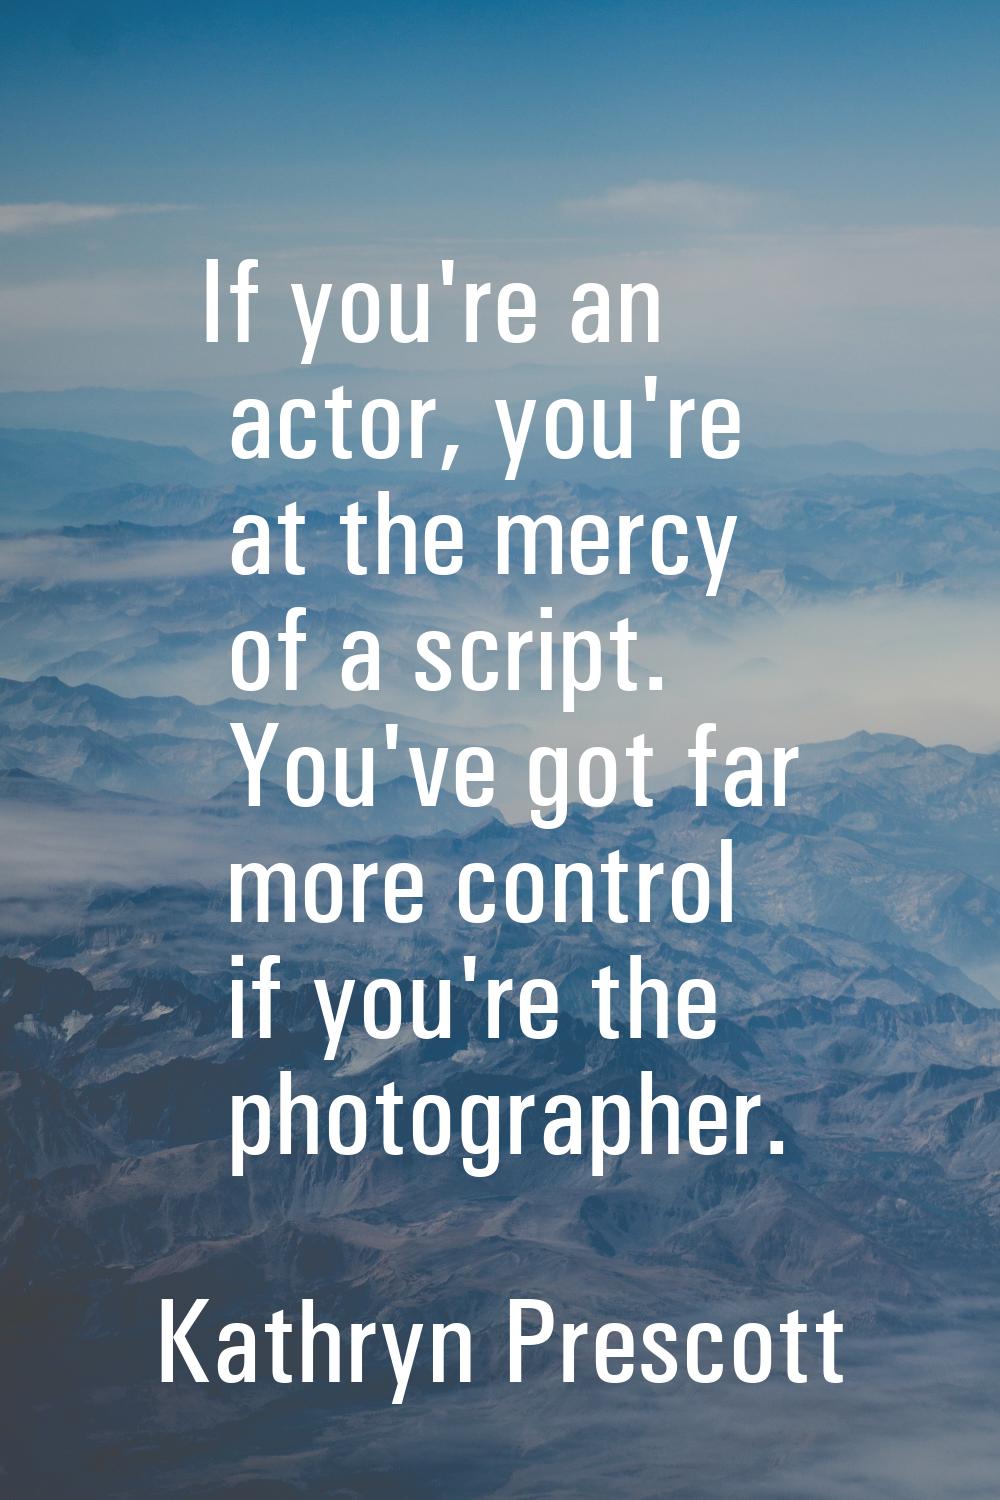 If you're an actor, you're at the mercy of a script. You've got far more control if you're the phot